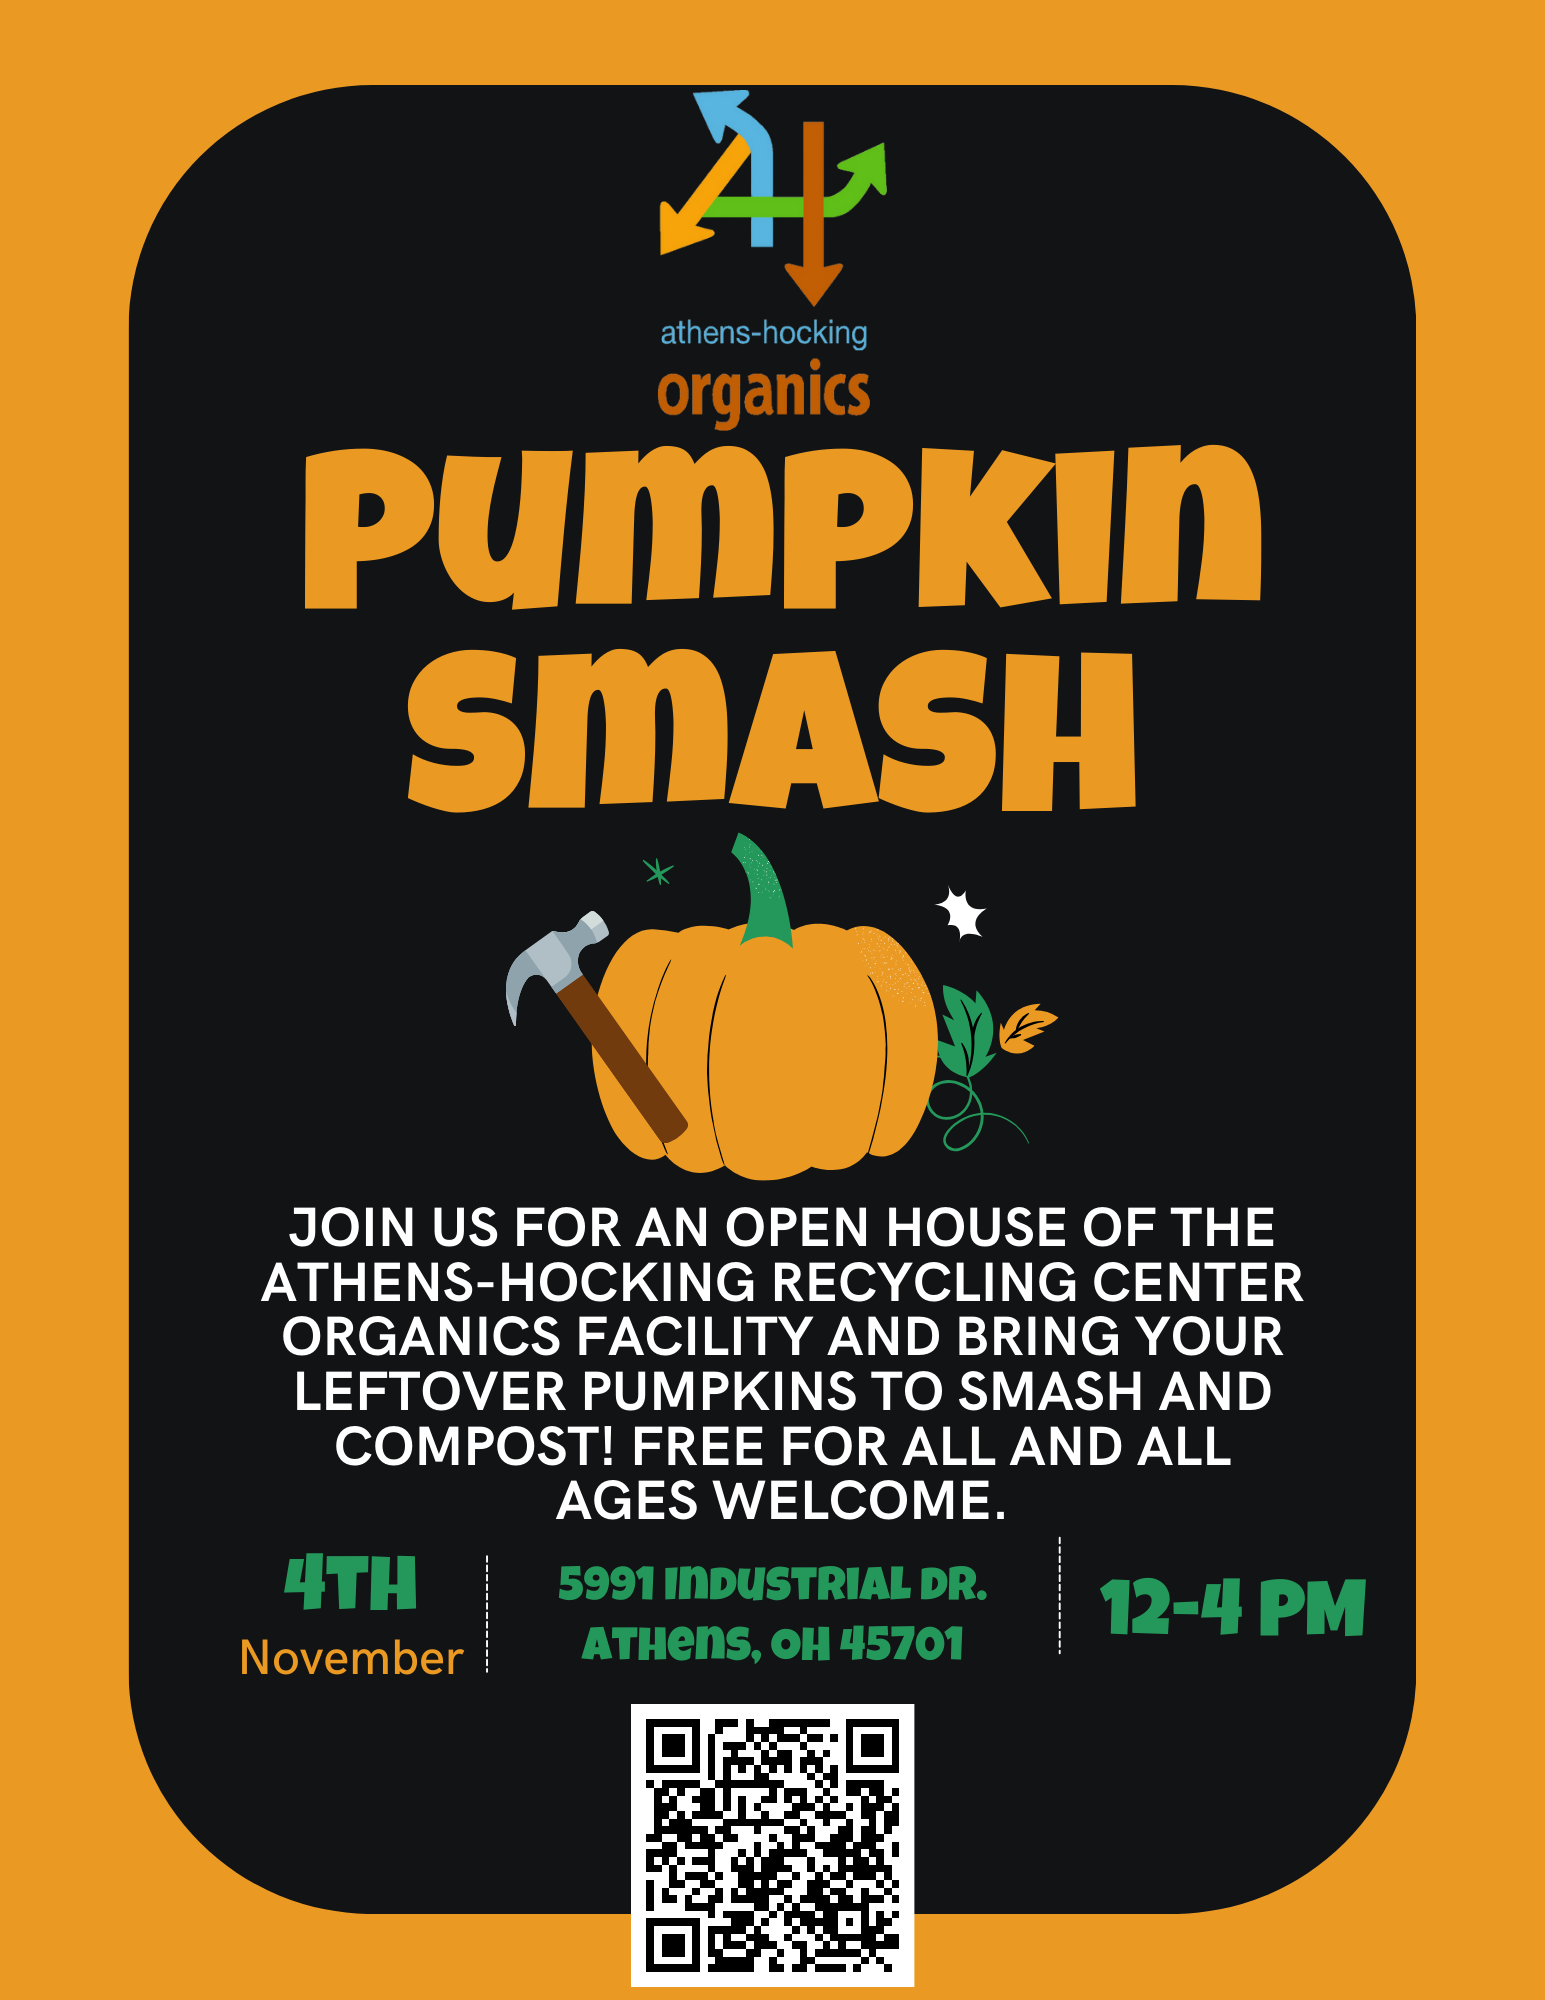 A flyer for the pumpkin smash event.